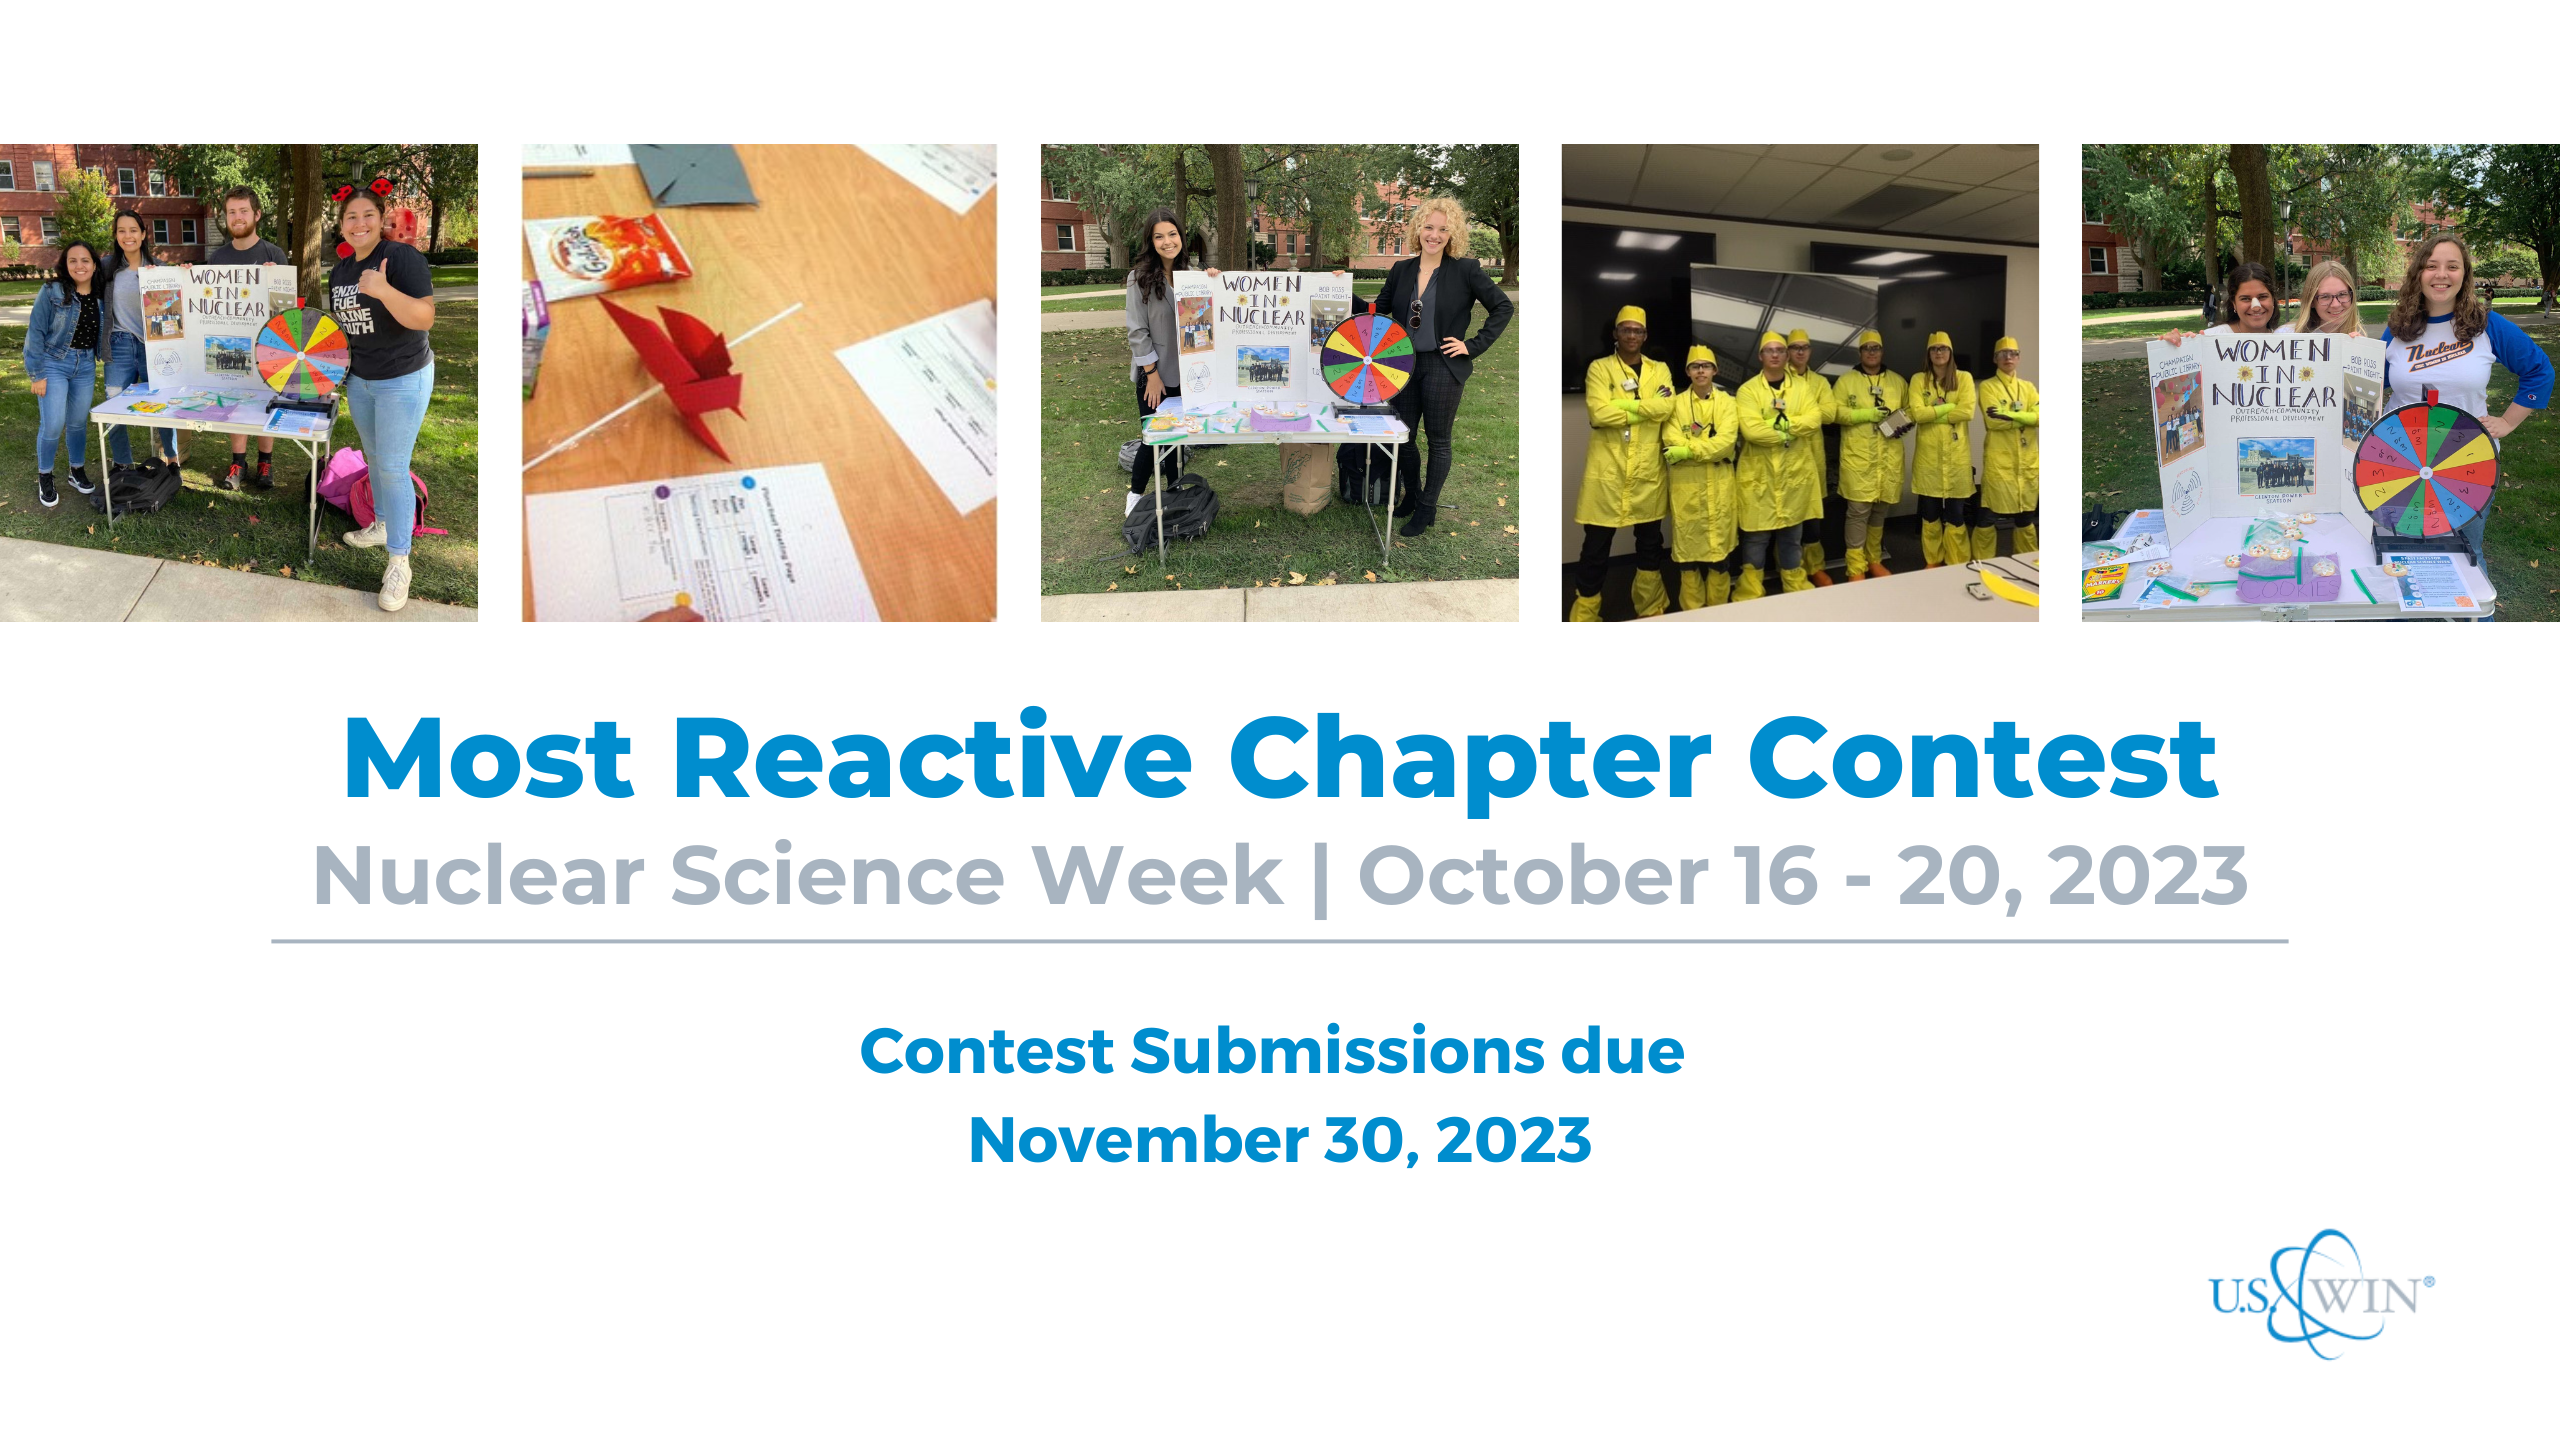 Most Reactive Chapter Submissions Due November 30